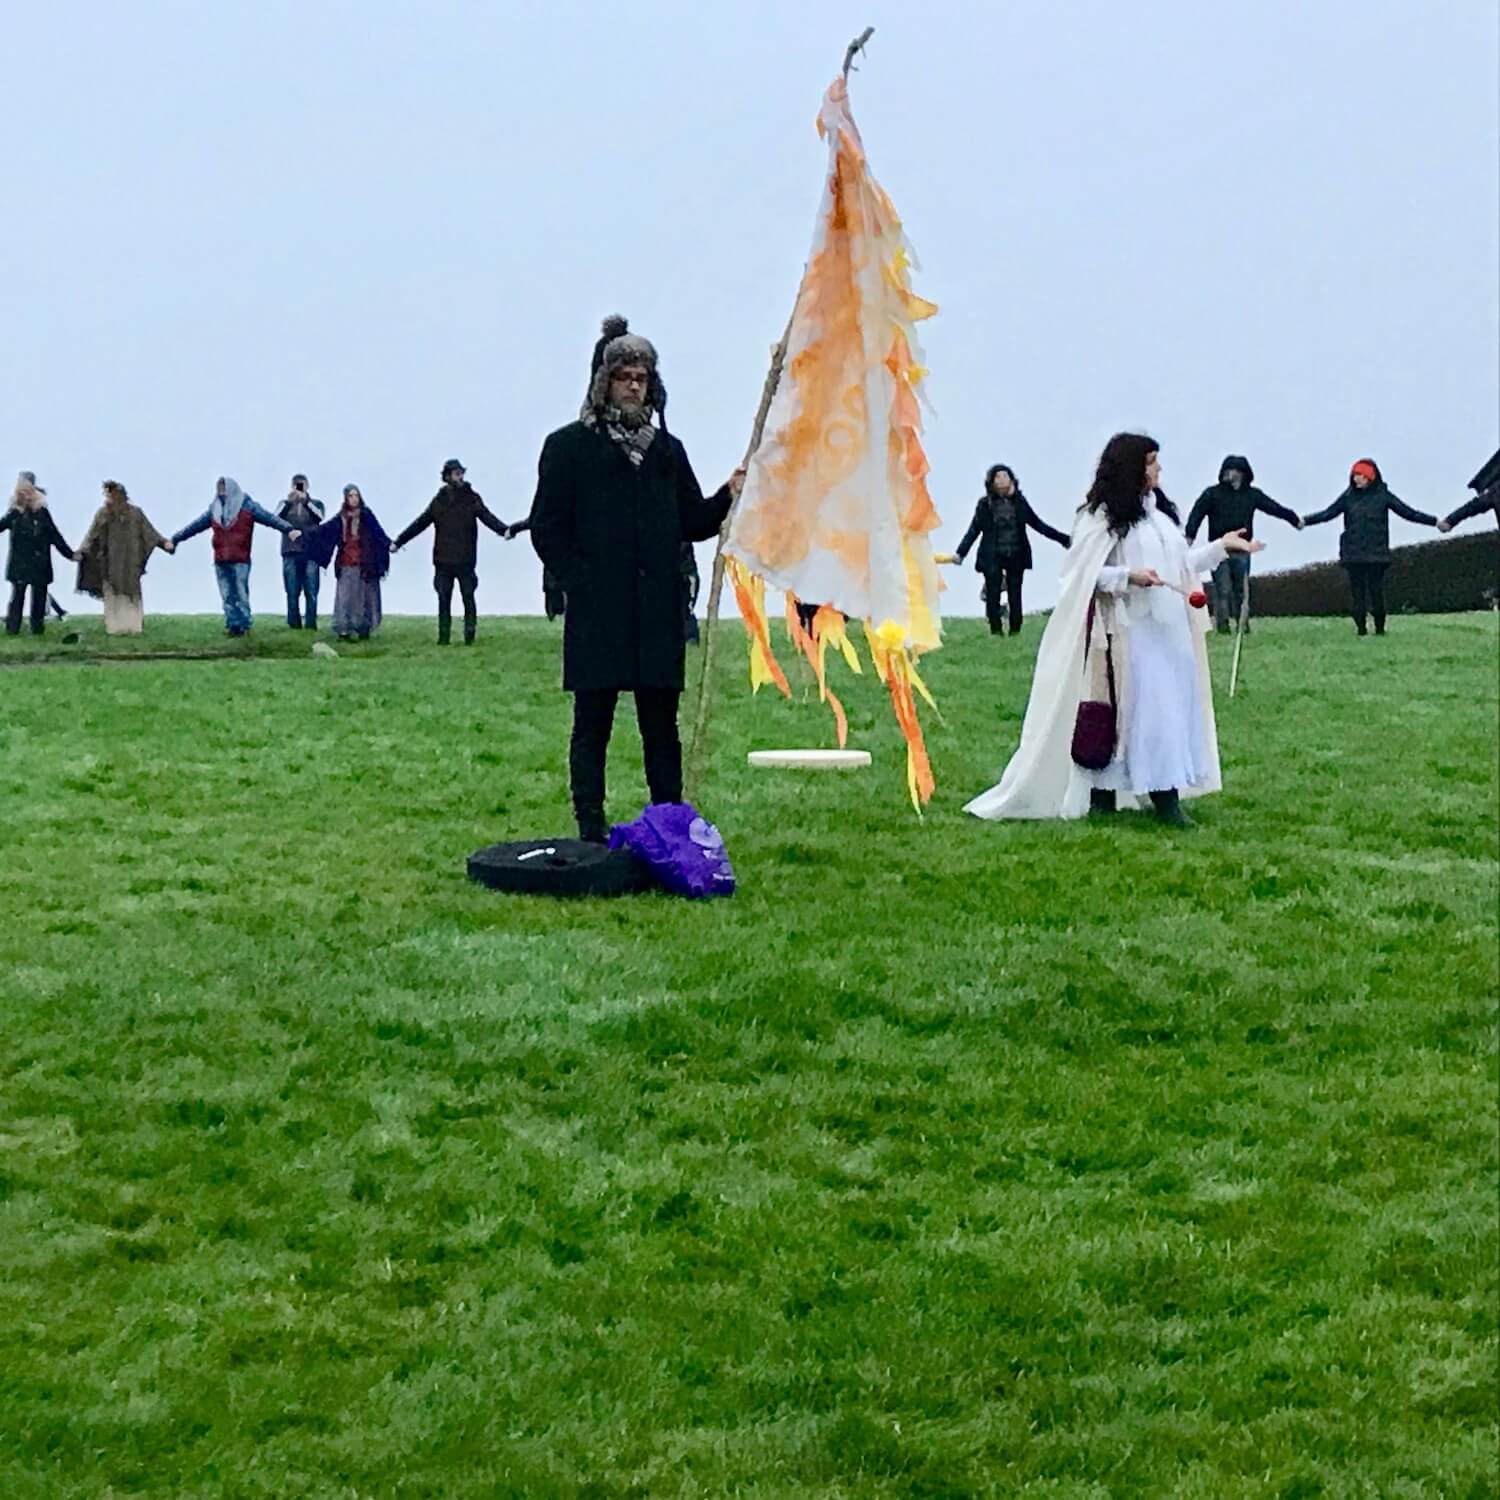 At winter solstice in Newgrange Ireland sunrise participants gather in one large circle around a woman in a white dress who strikes a gong to welcome in the new year.